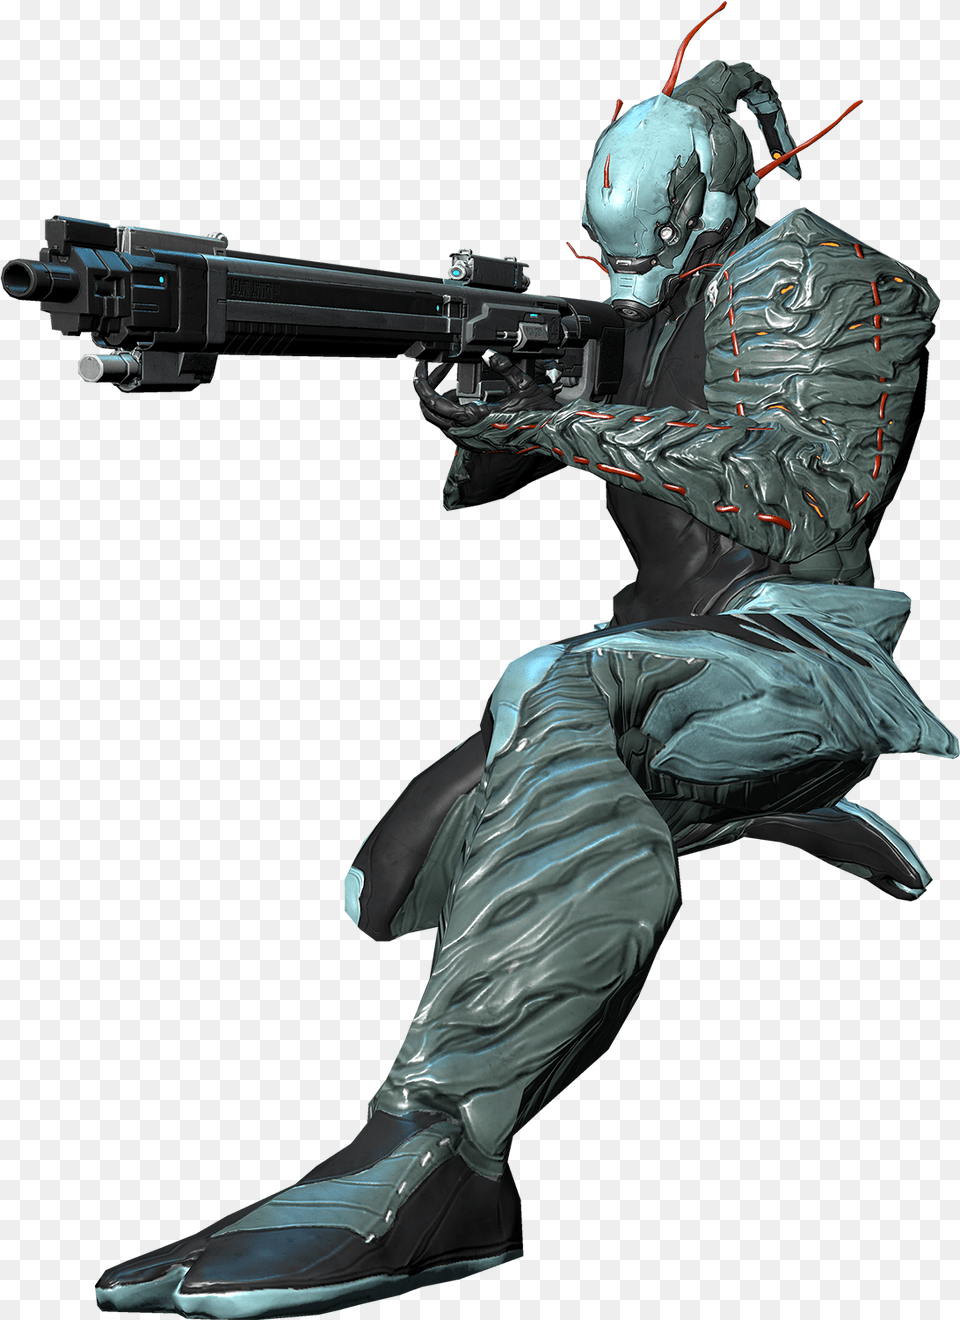 Download Warframe For Designing Projects Warframe Ash, Gun, Weapon, Adult, Male Free Transparent Png